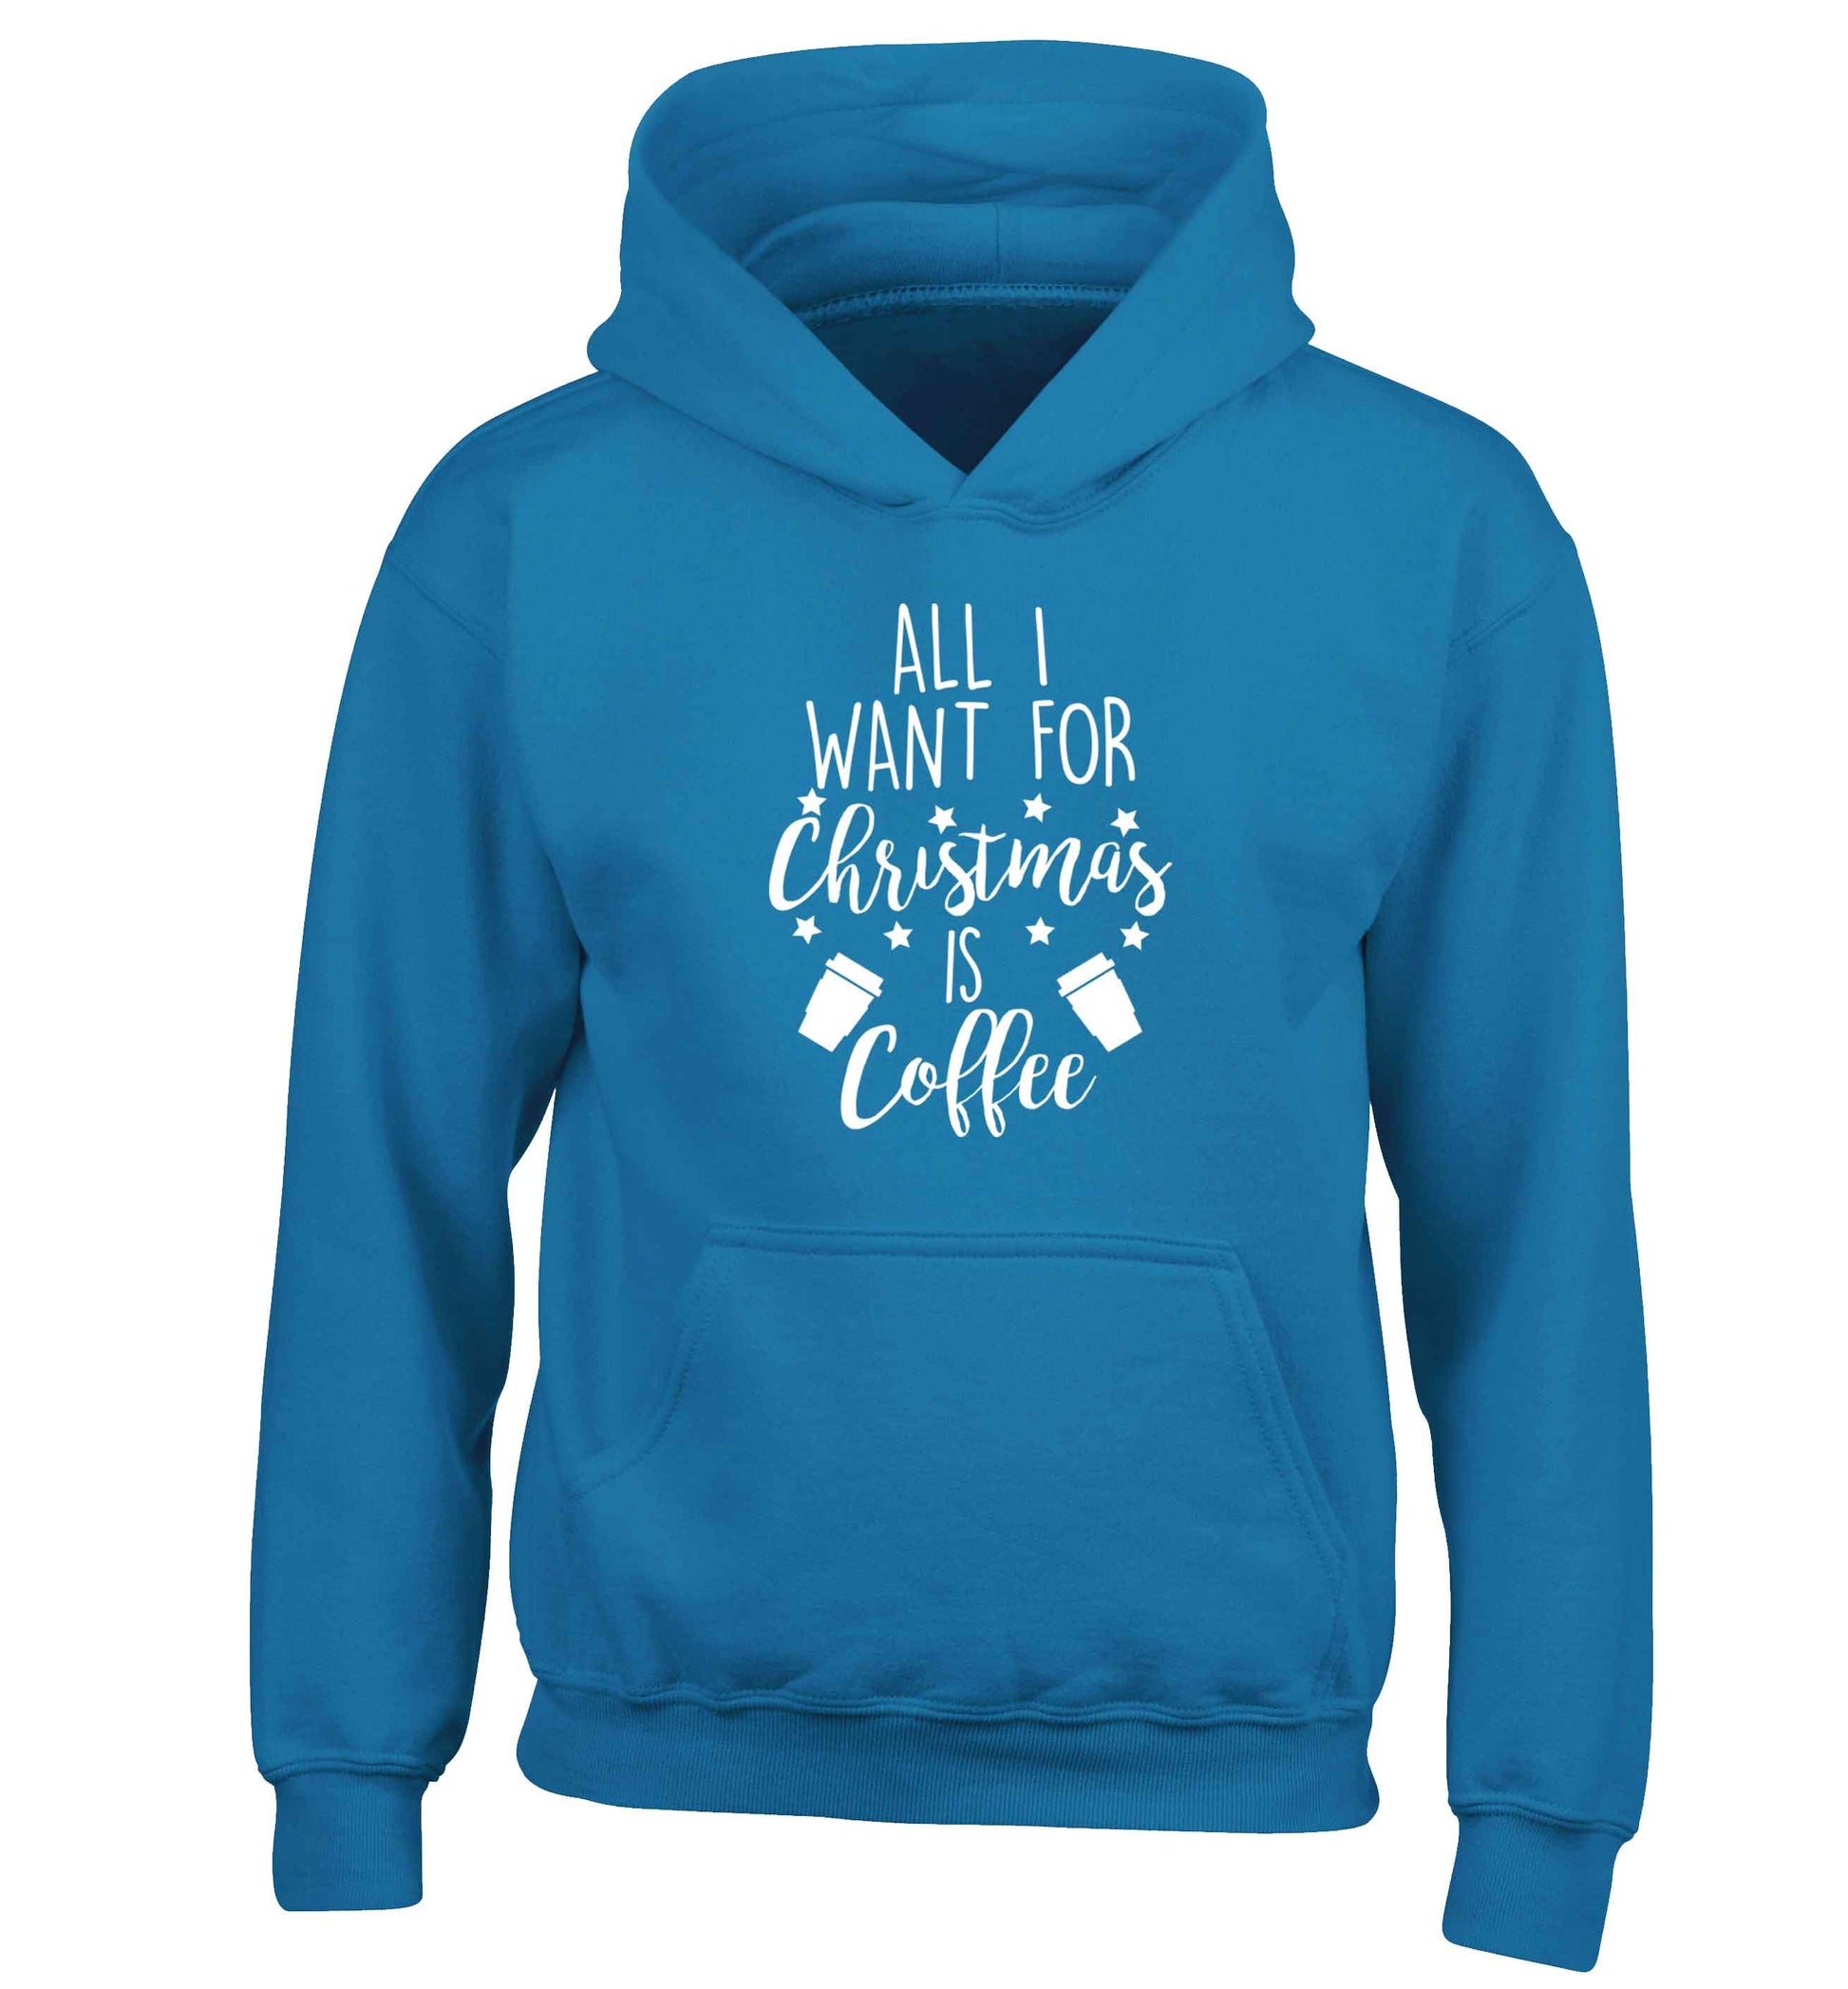 All I want for Christmas is coffee children's blue hoodie 12-13 Years